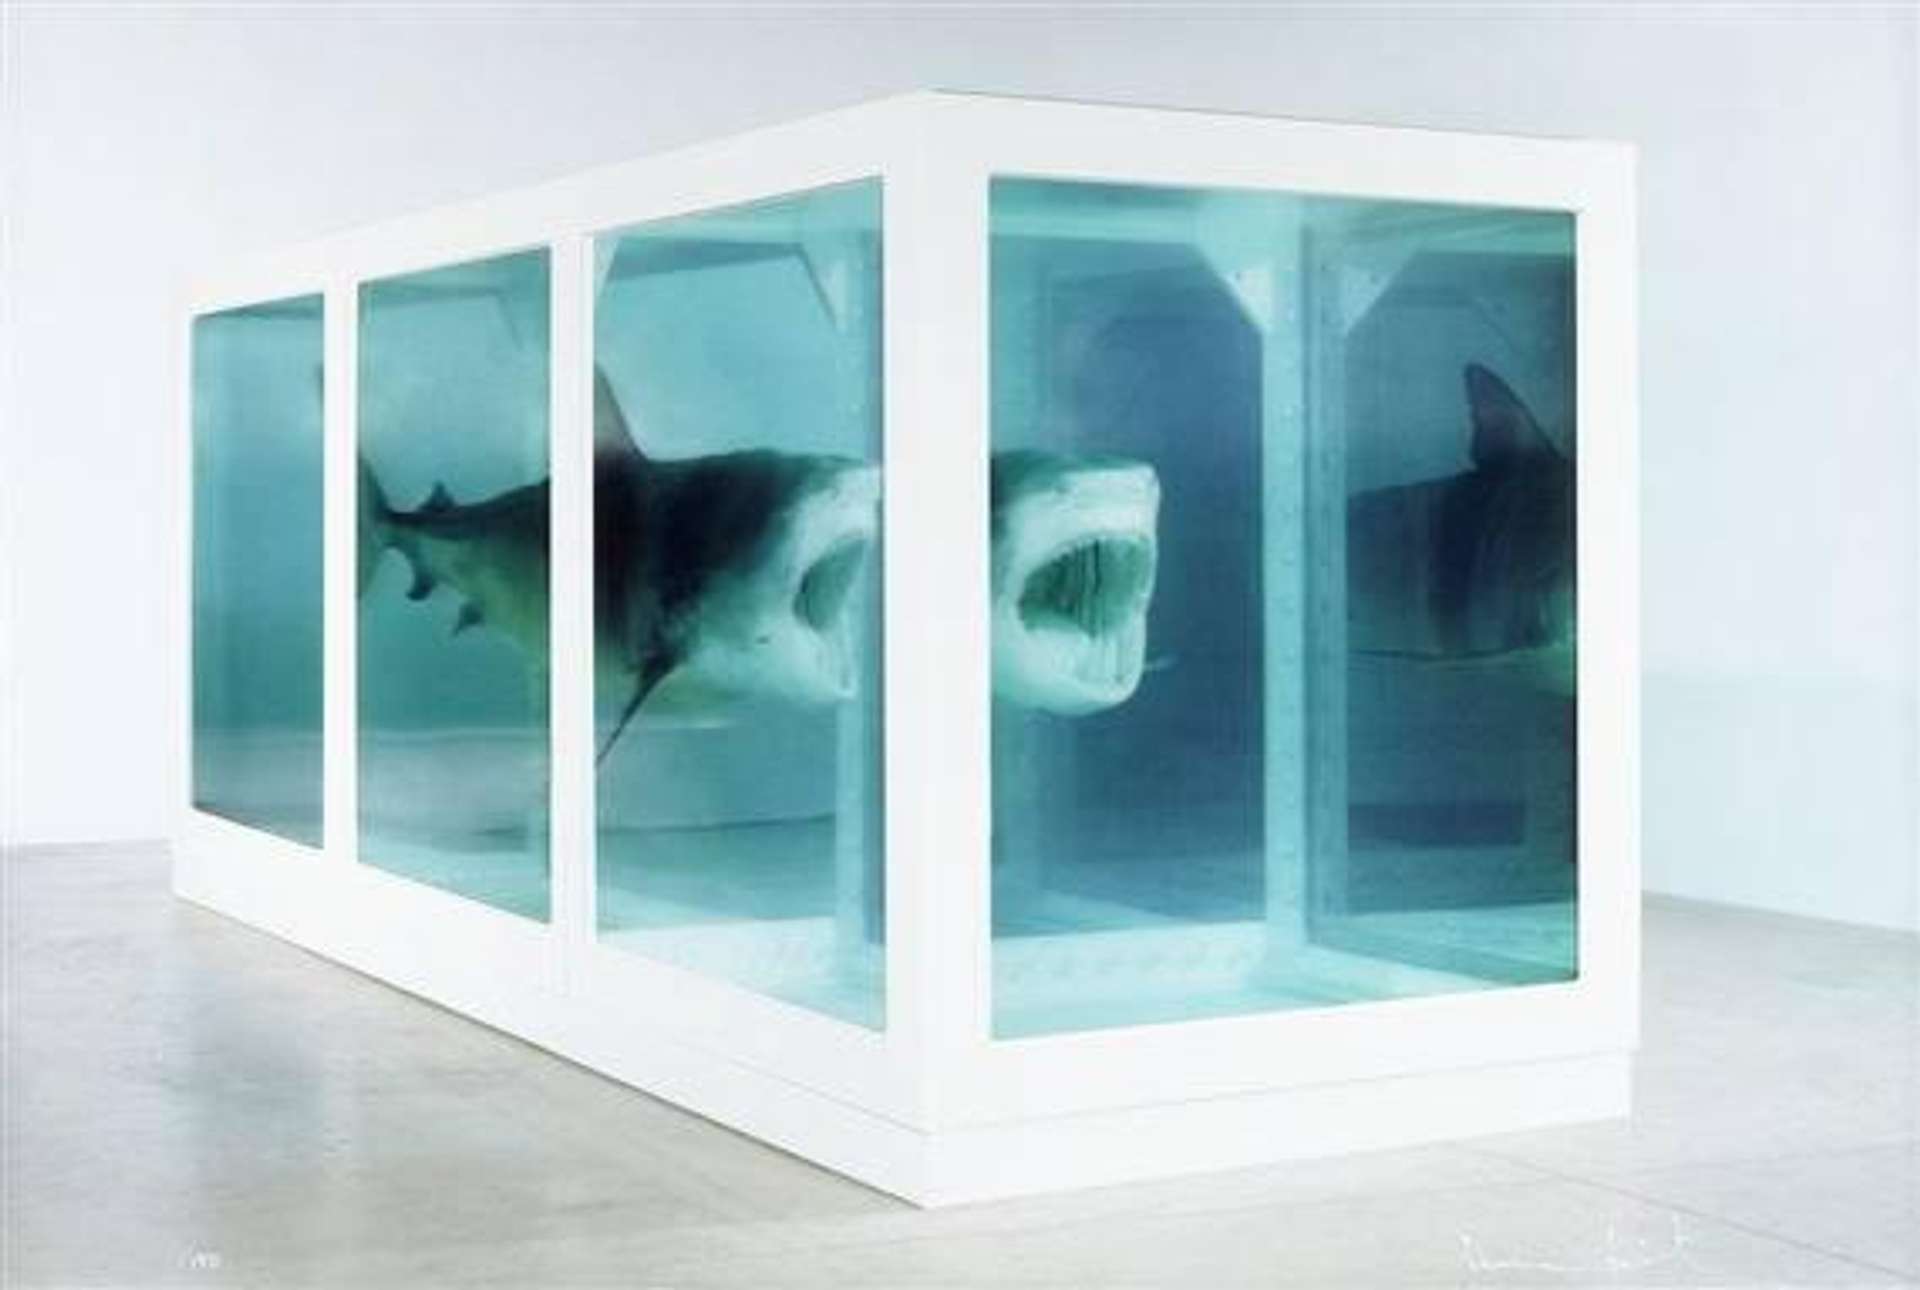 Damien Hirst: The Physical Impossibility Of Death In The Mind Of Someone Living - Signed Print